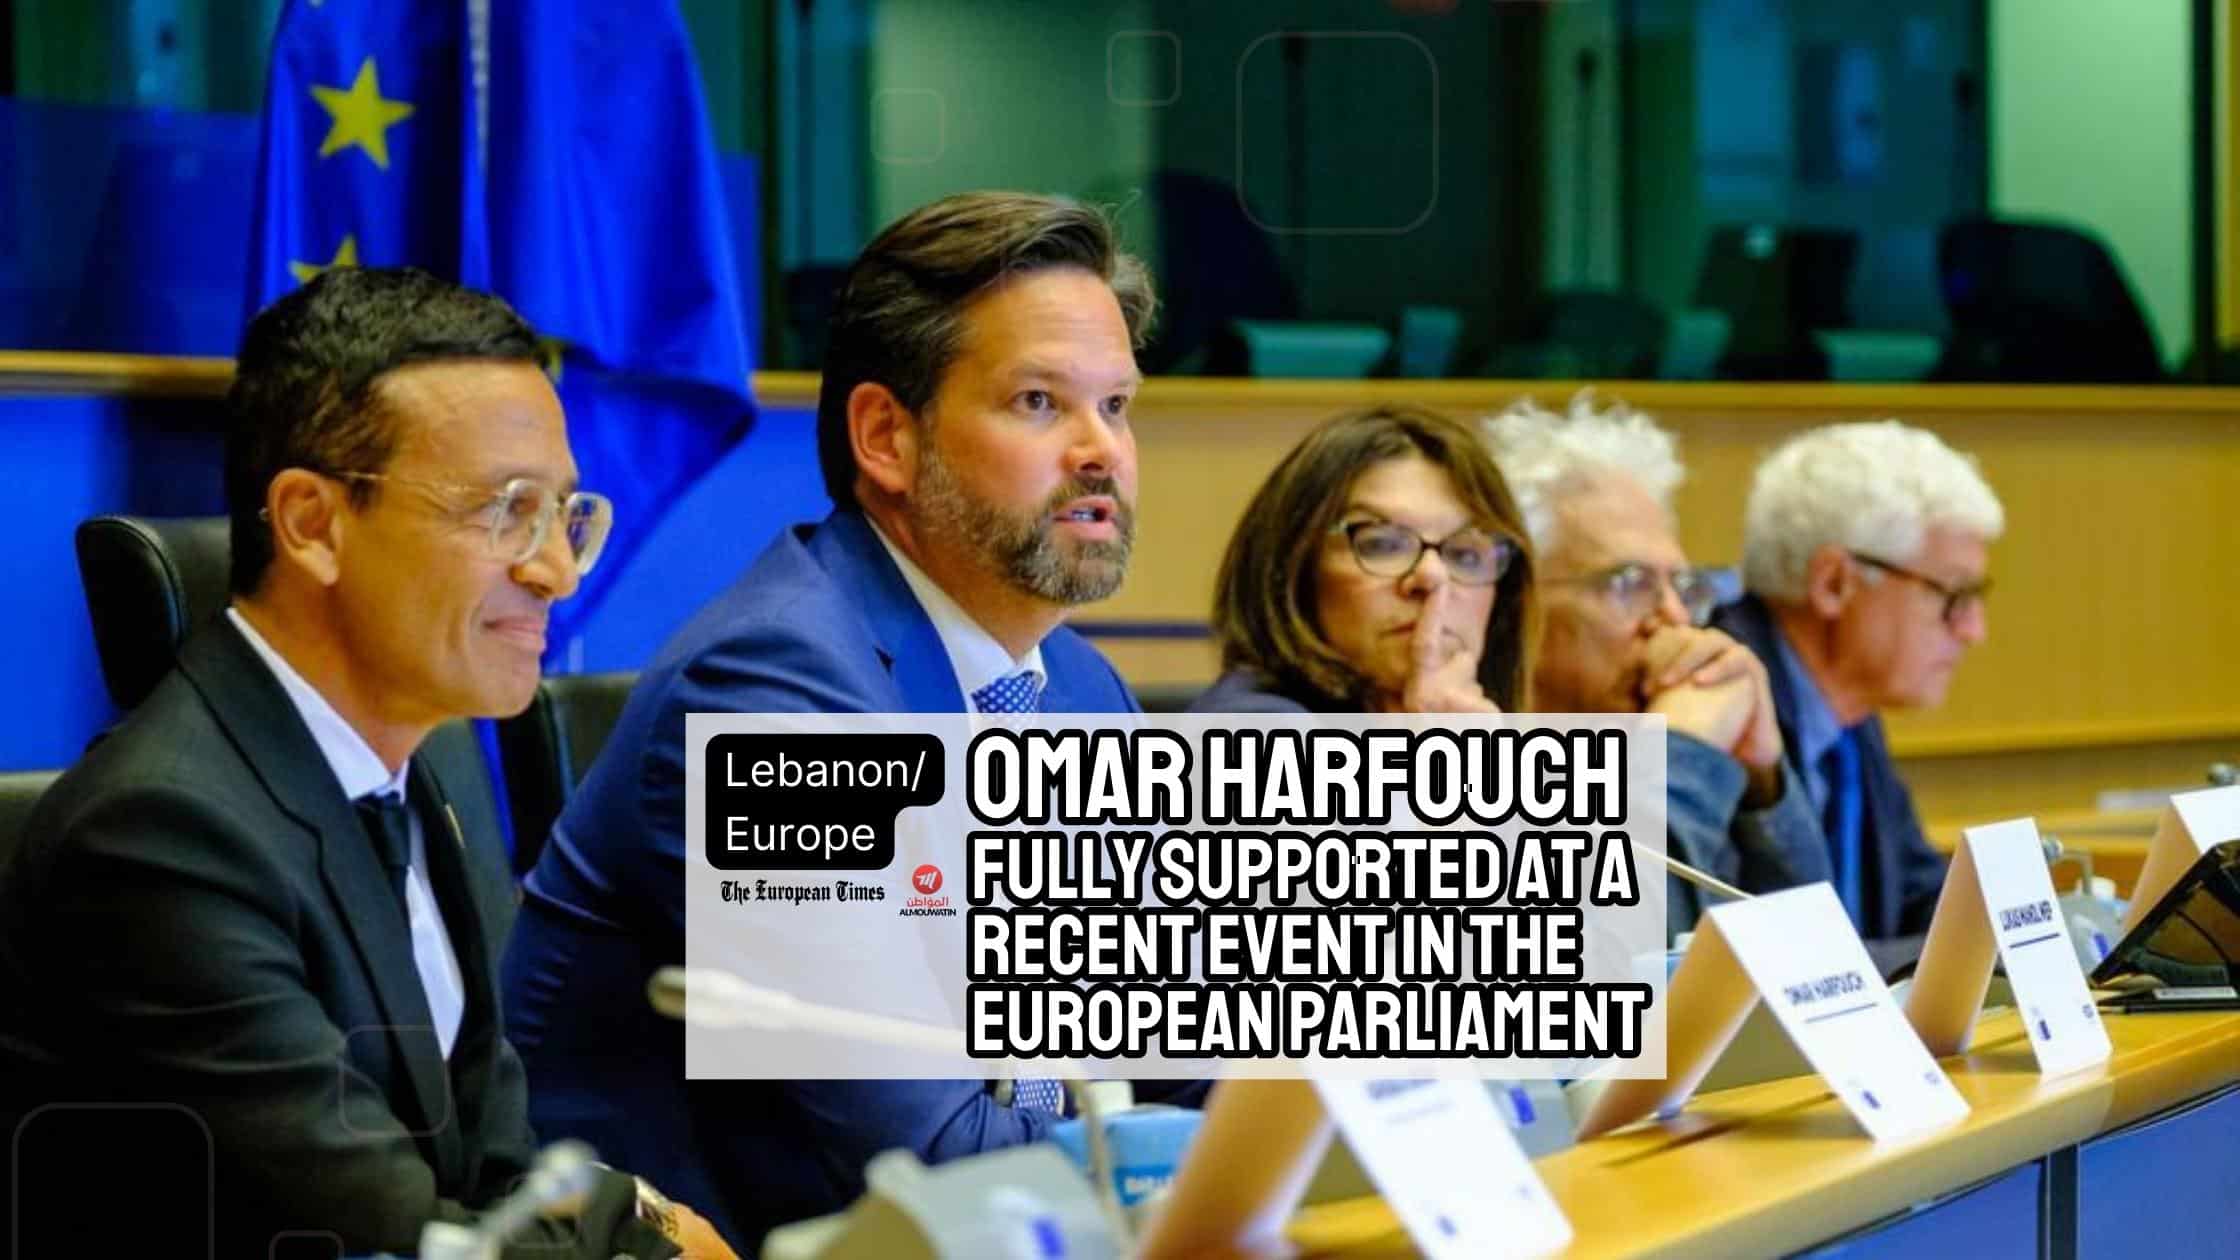 Lebanon, Omar Harfouch fully supported at a recent event in the European Parliament